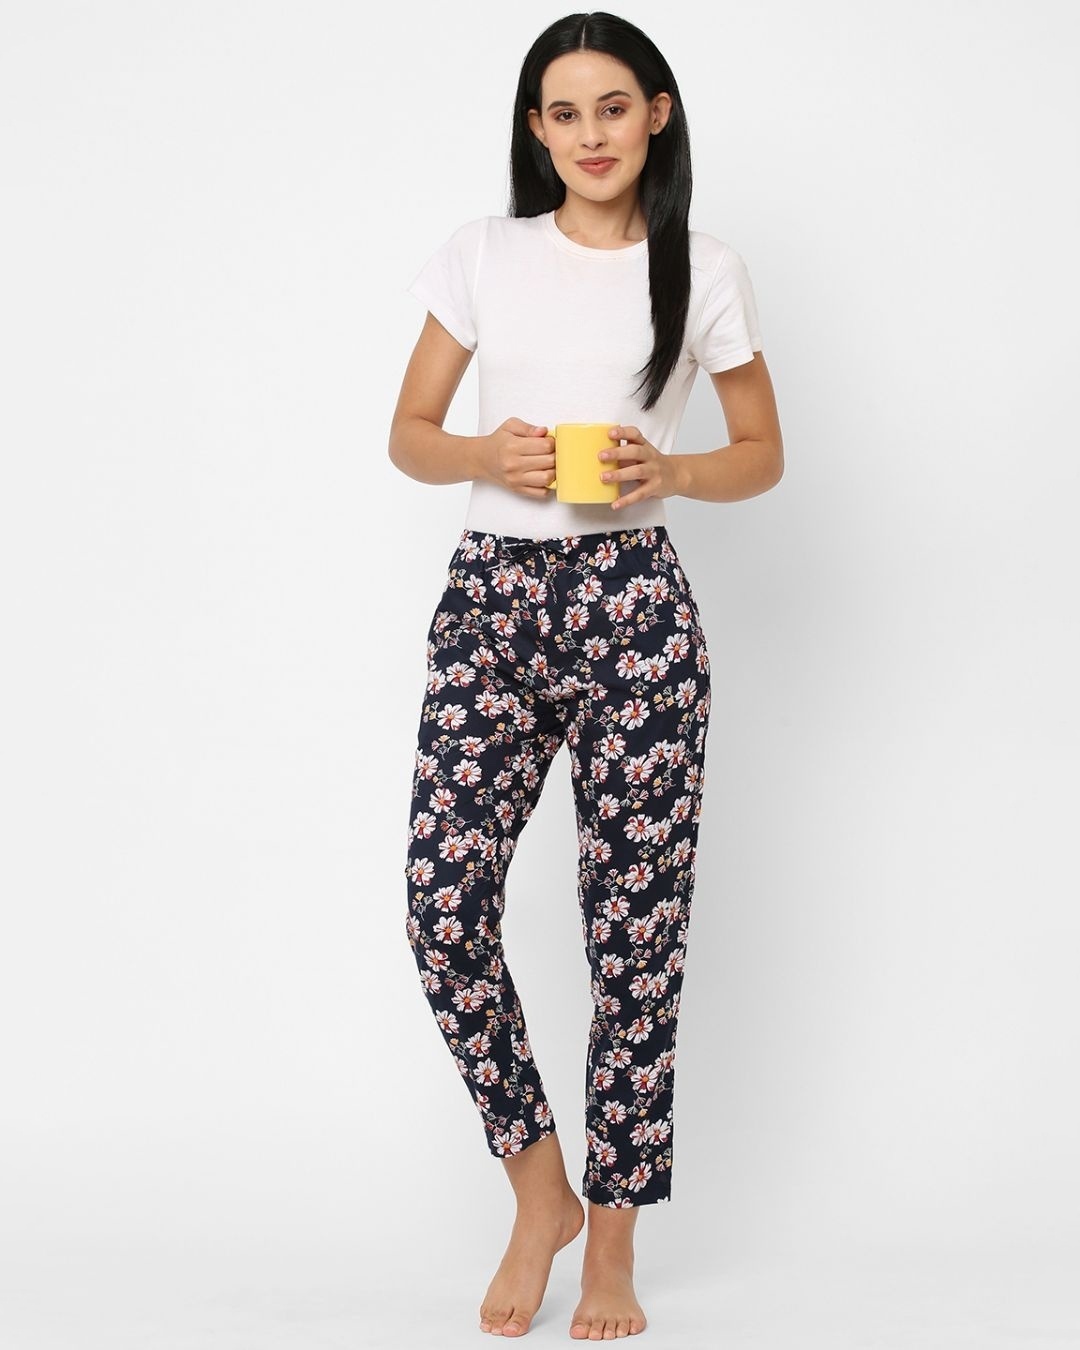 Shop Women's Blue All Over Floral Printed Cotton Lounge Pants